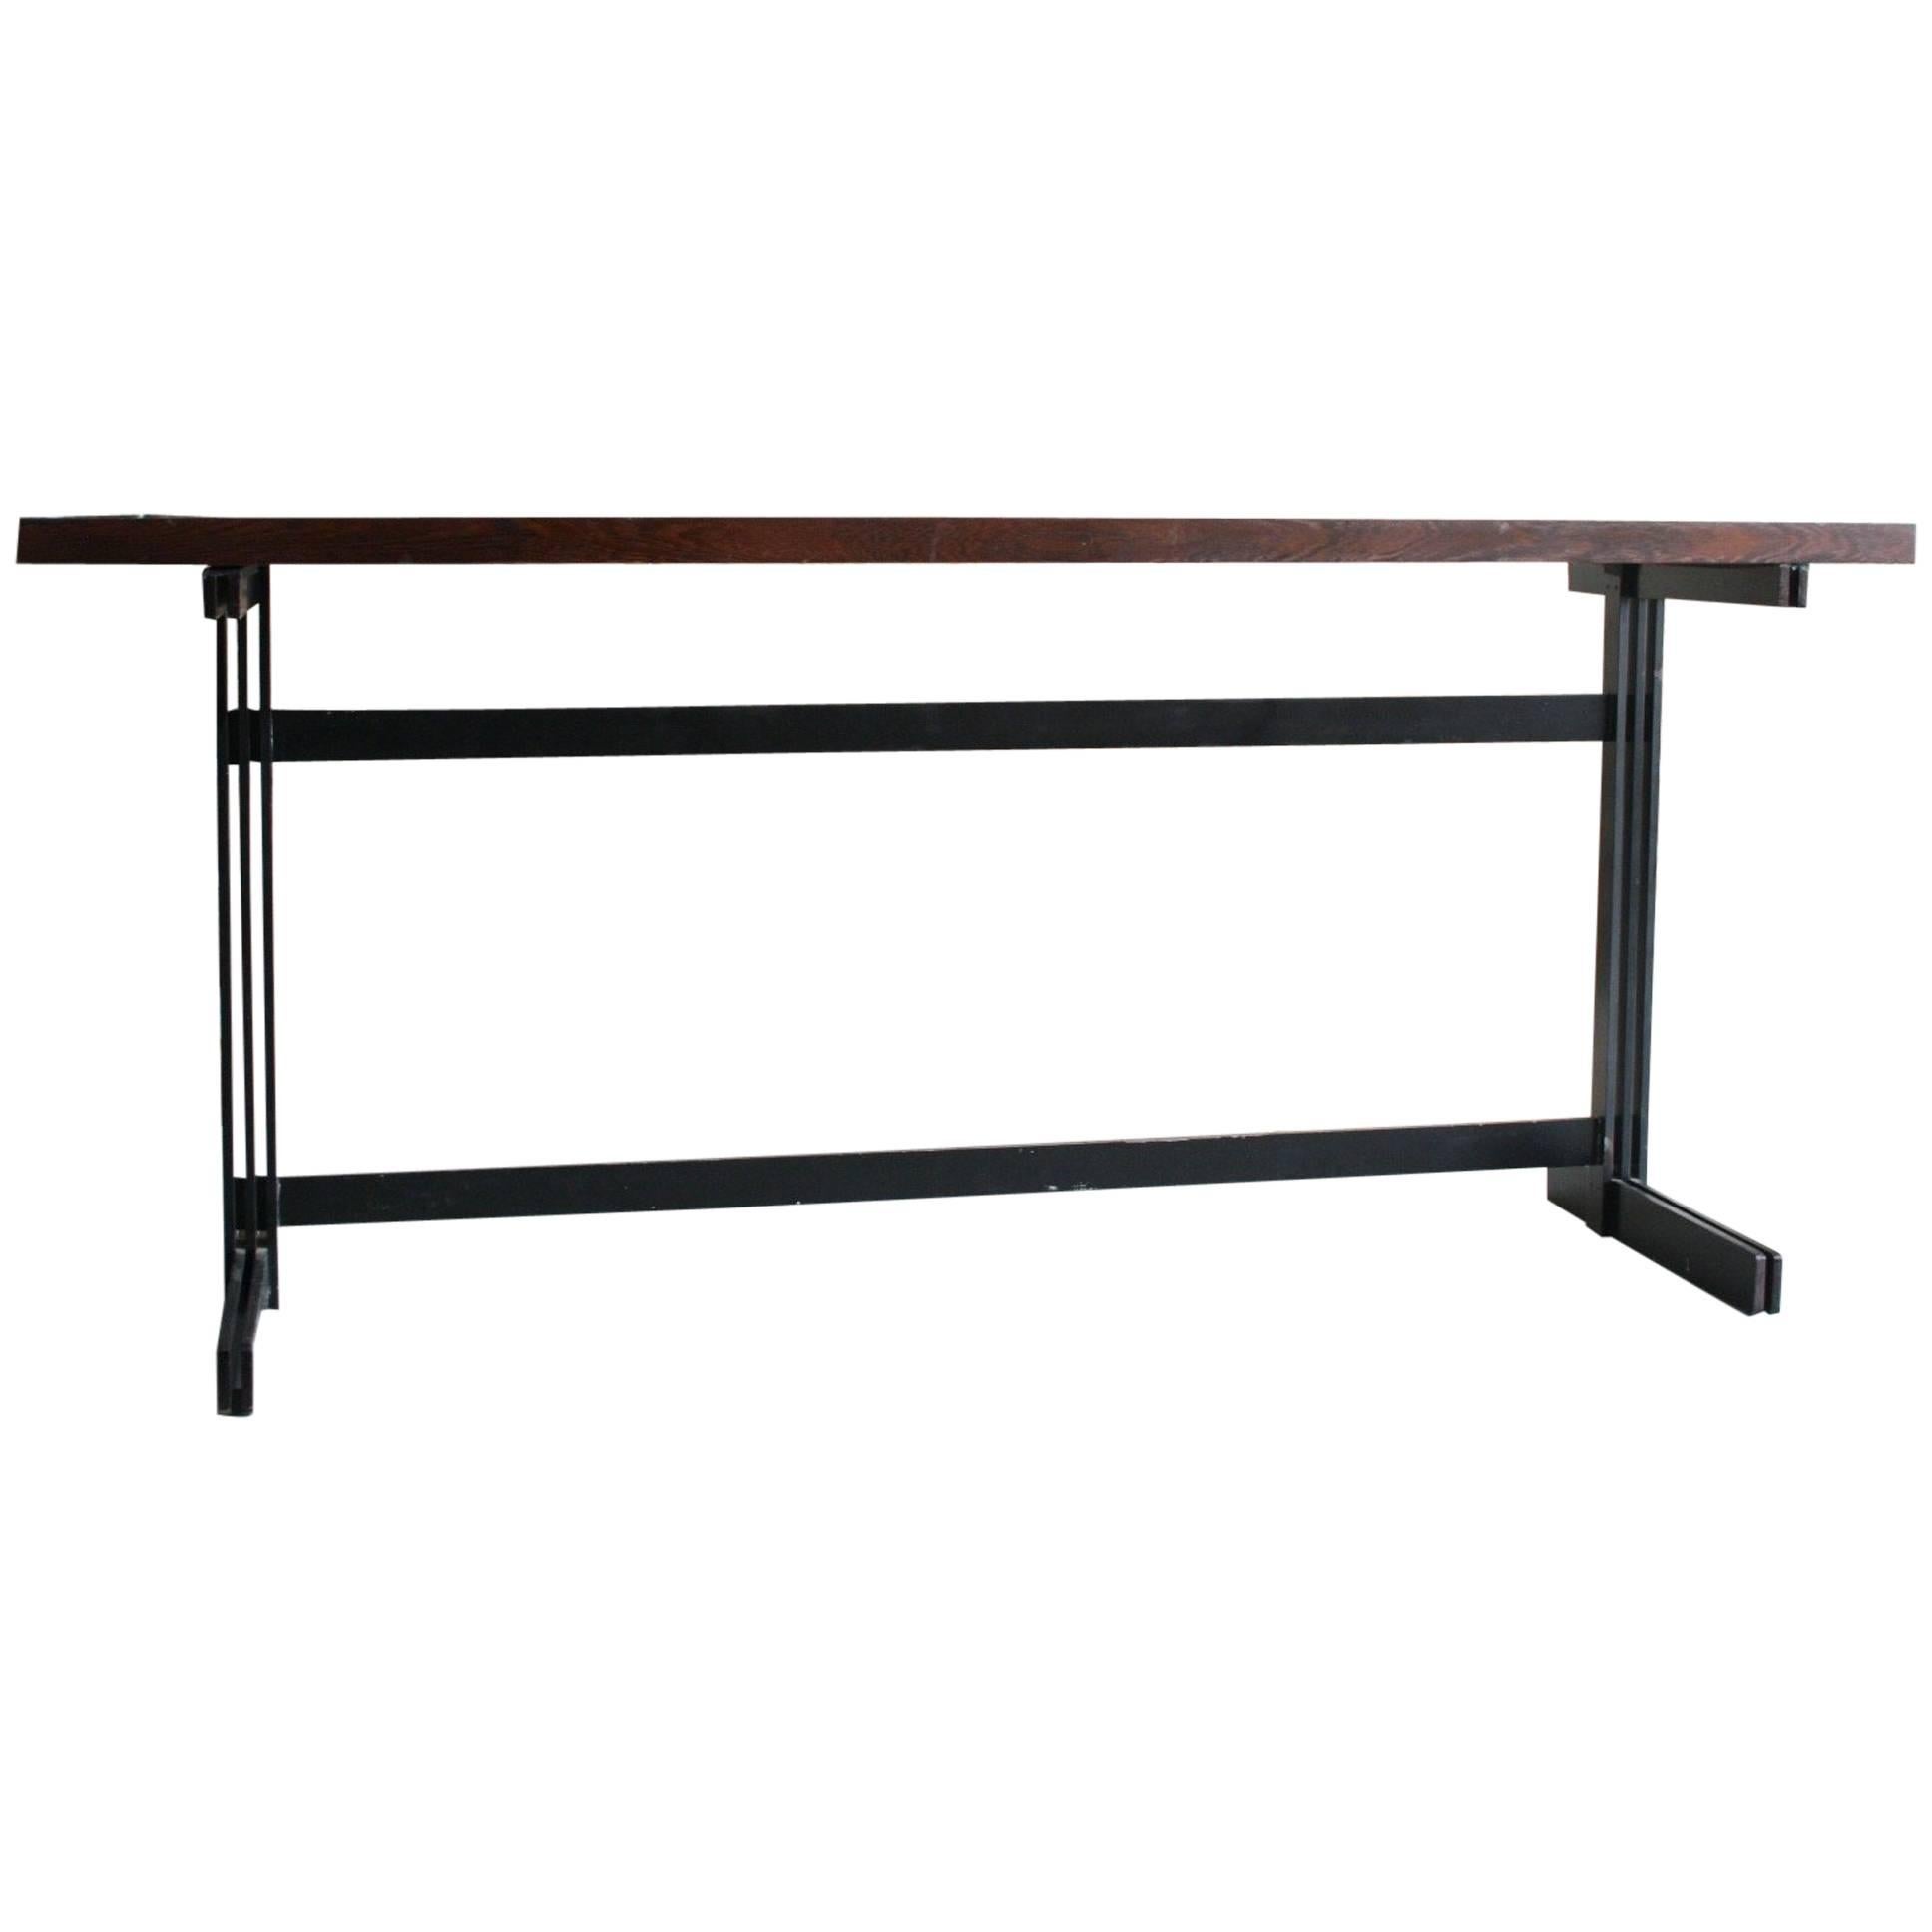 Jules Wabbes Le Mobilier Universel Belgium Wenge and Steel Console For Sale